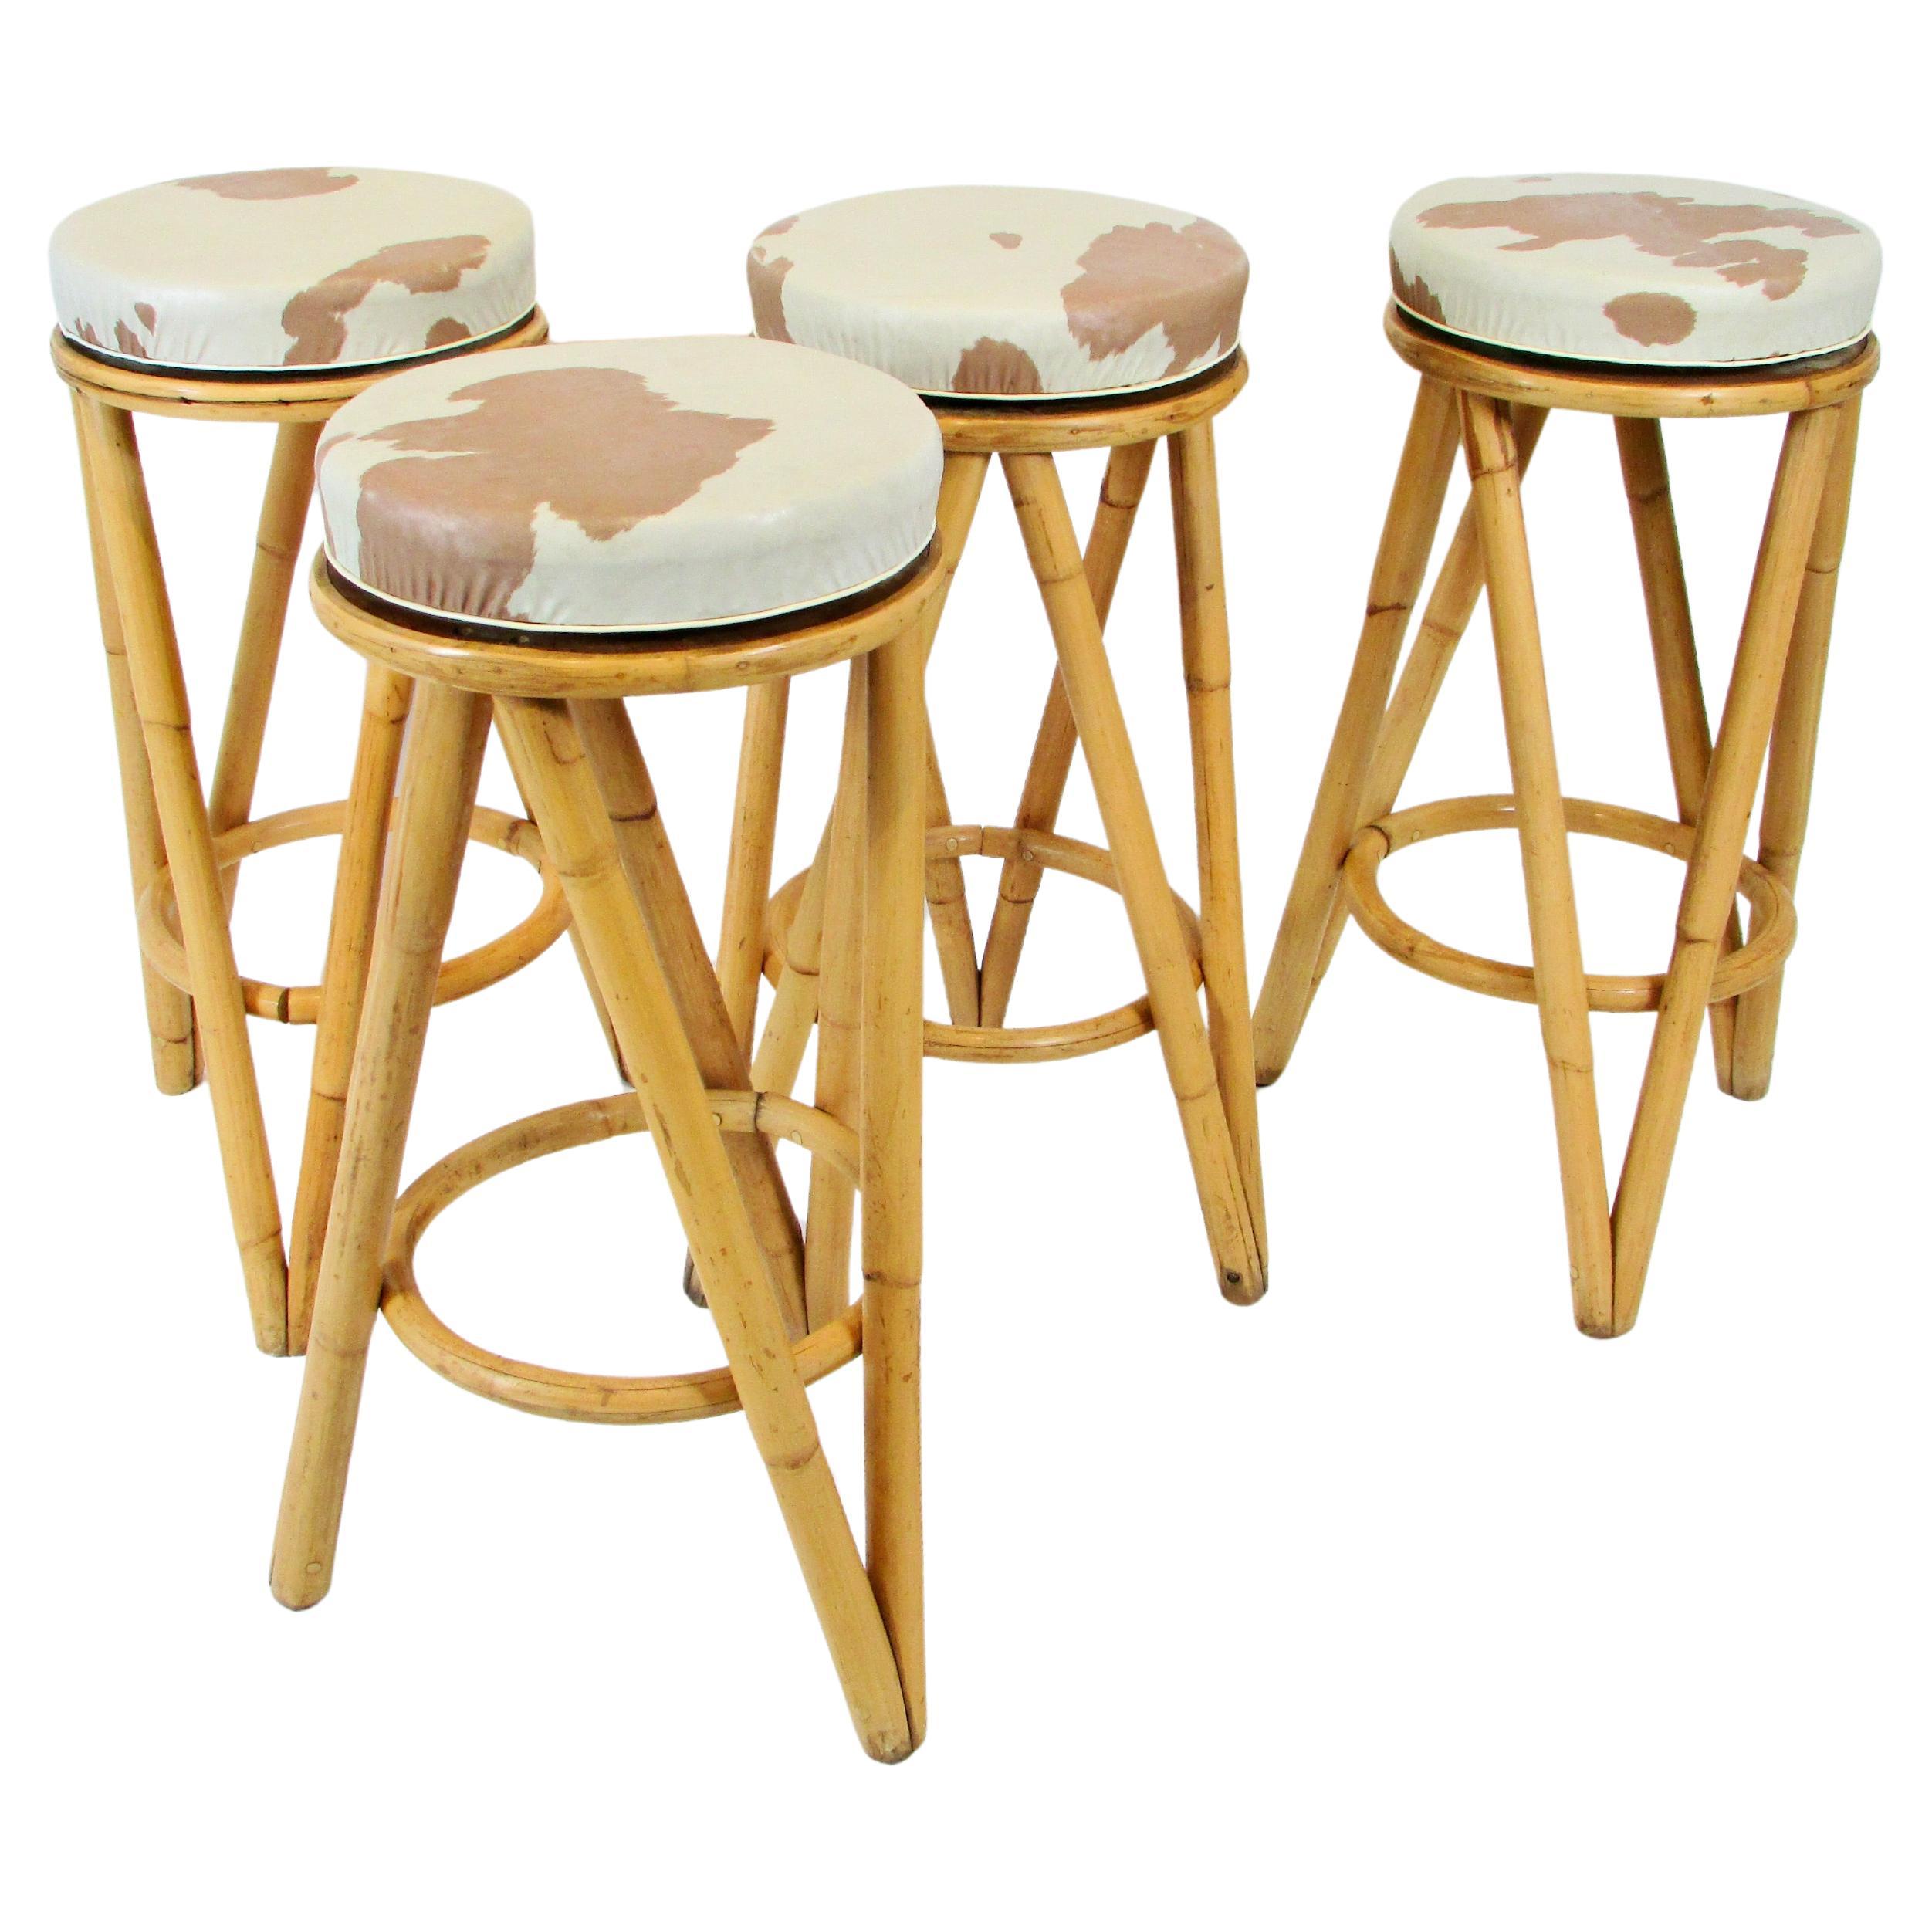 Set of four 1950s bamboo tiki bar stools with swivel tops